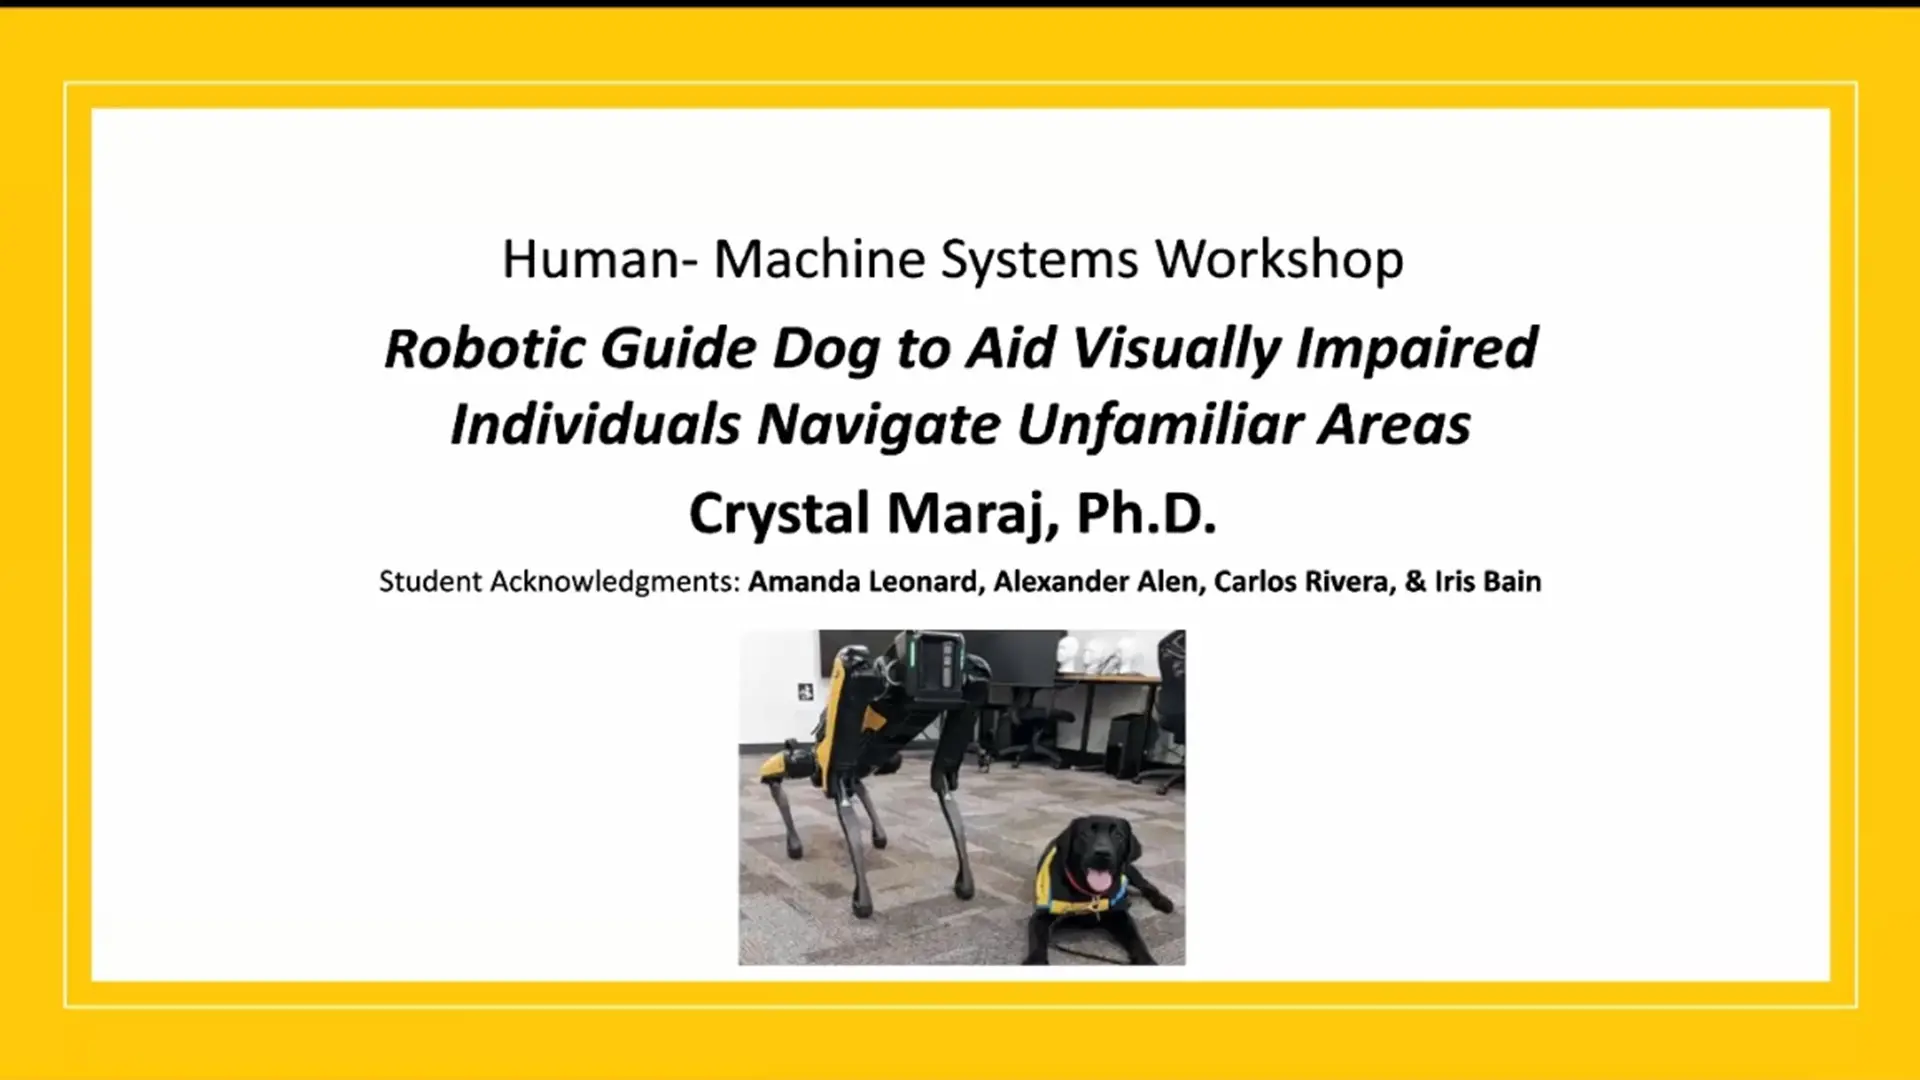 Robotic Guide Dog to Aid Visually Impaired Individuals Navigate Unfamiliar Areas